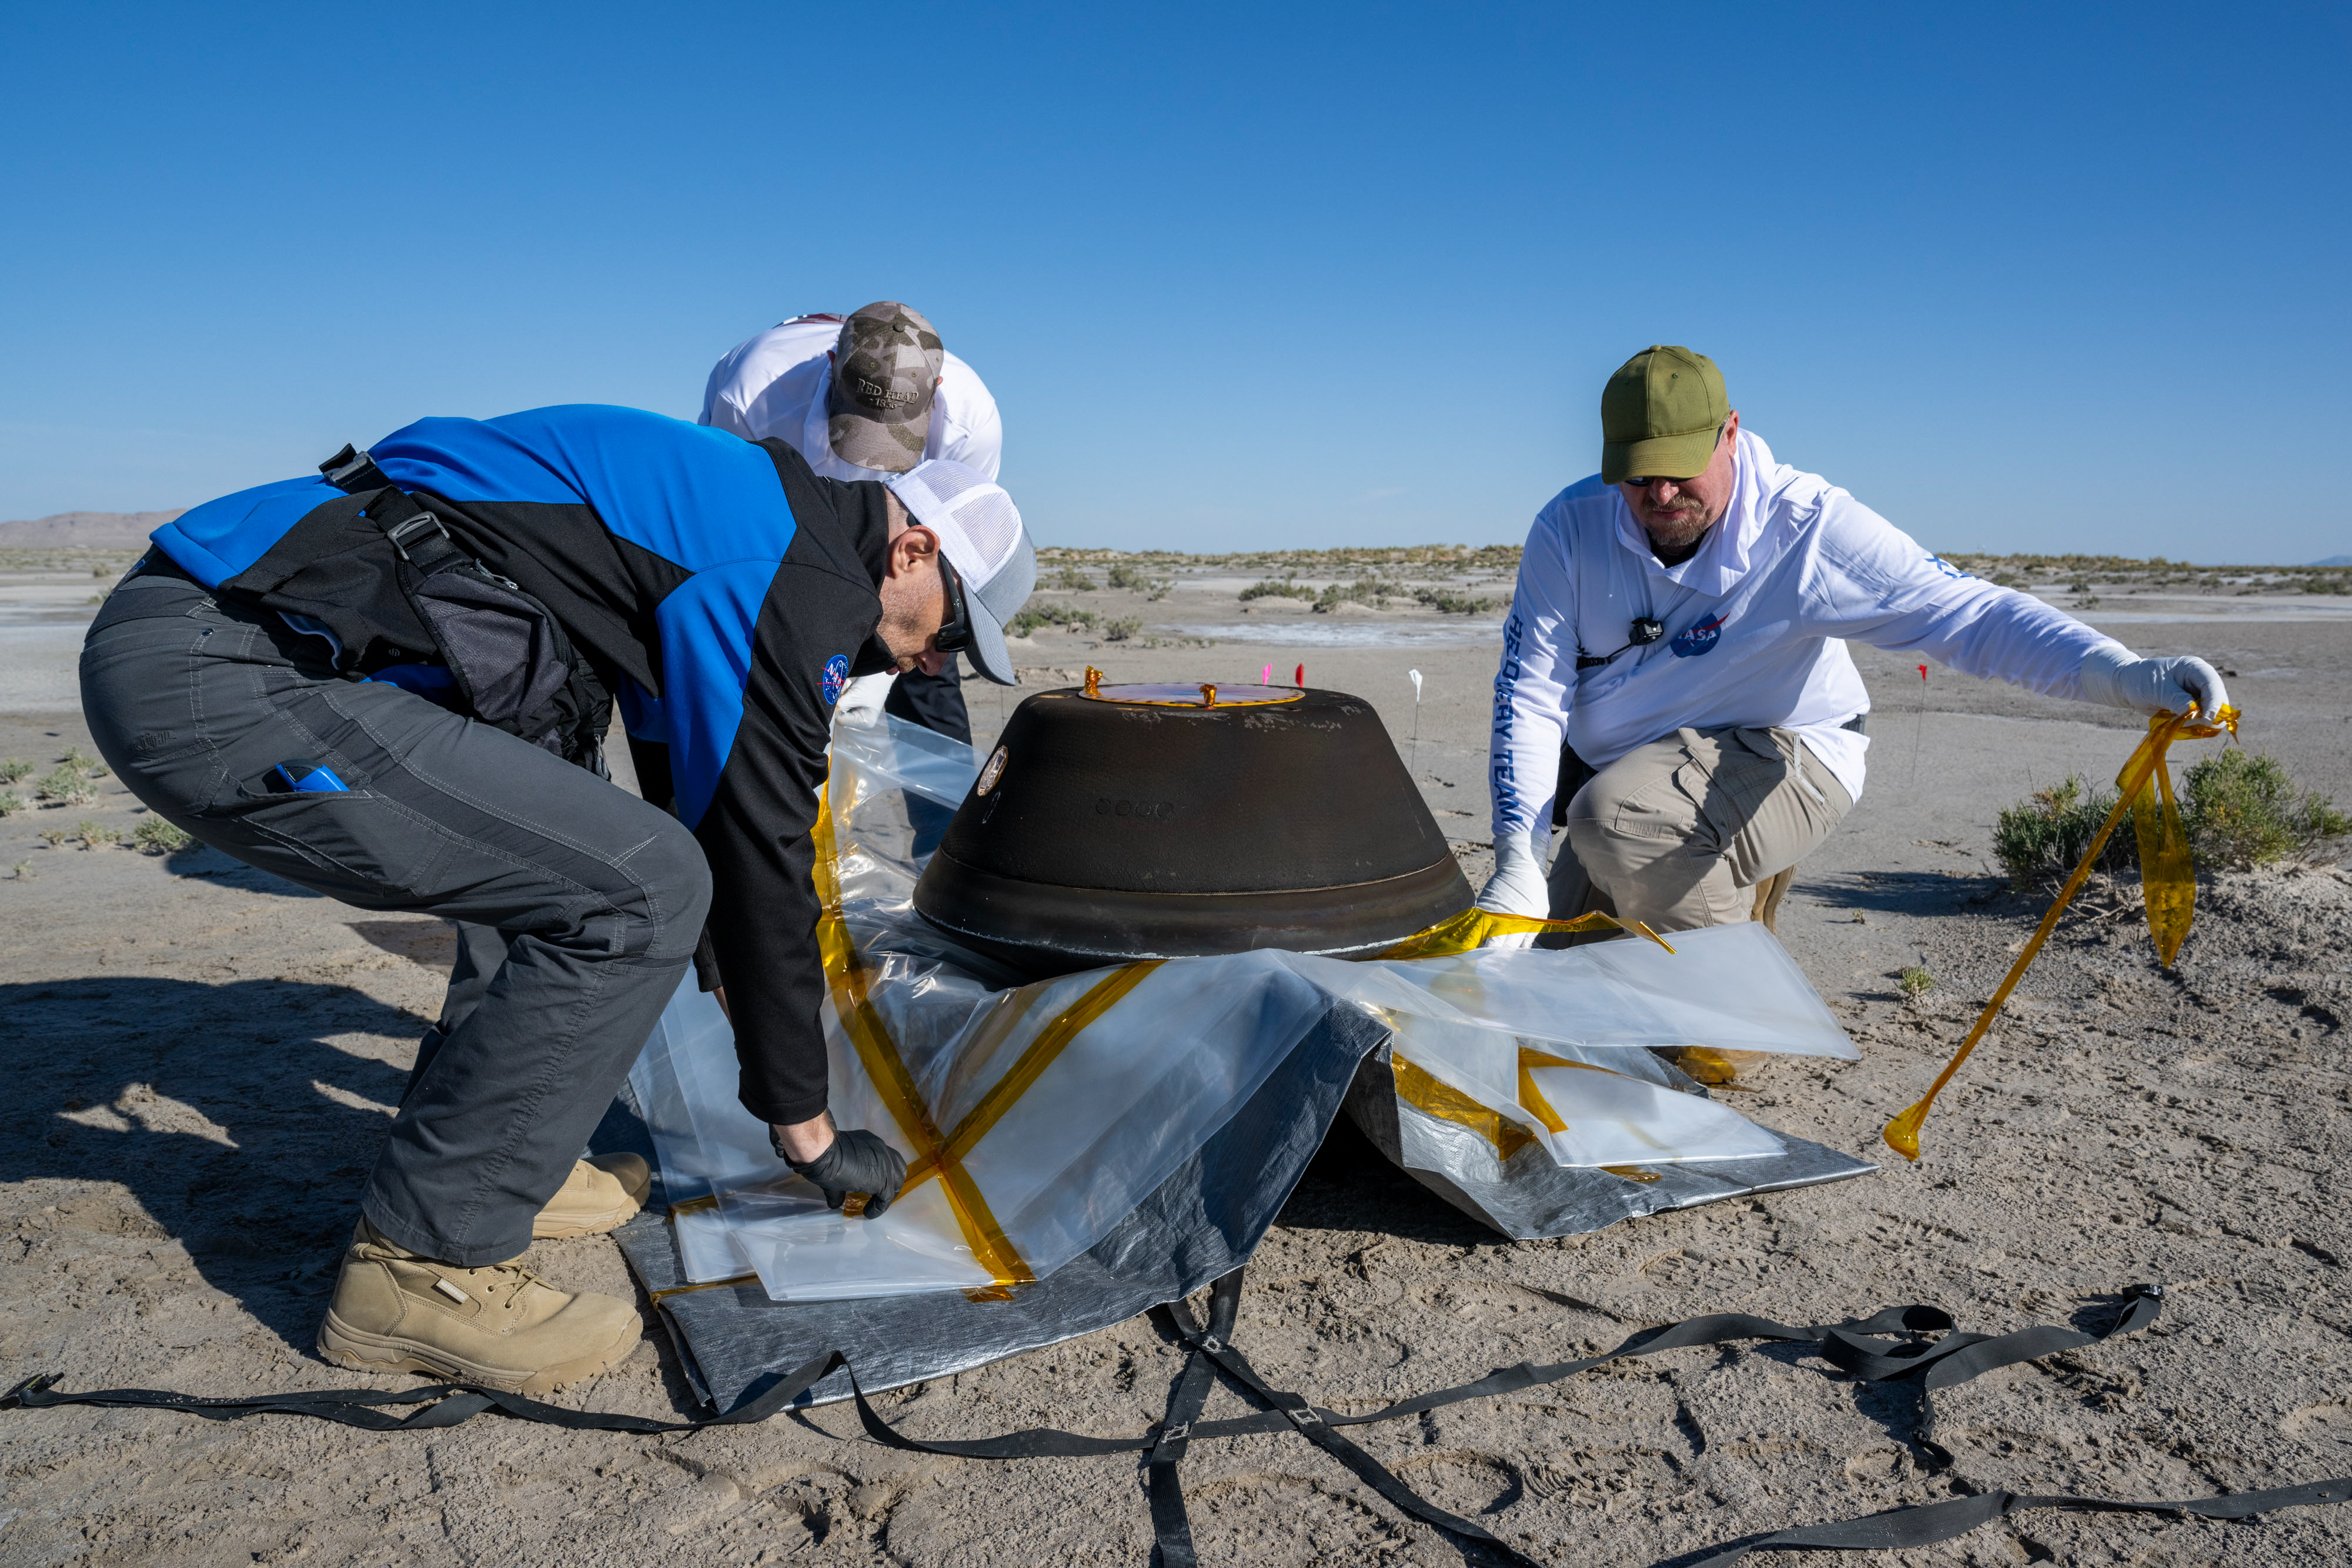 Three men prepare the sample for transport by helicopter in the desert.⁣